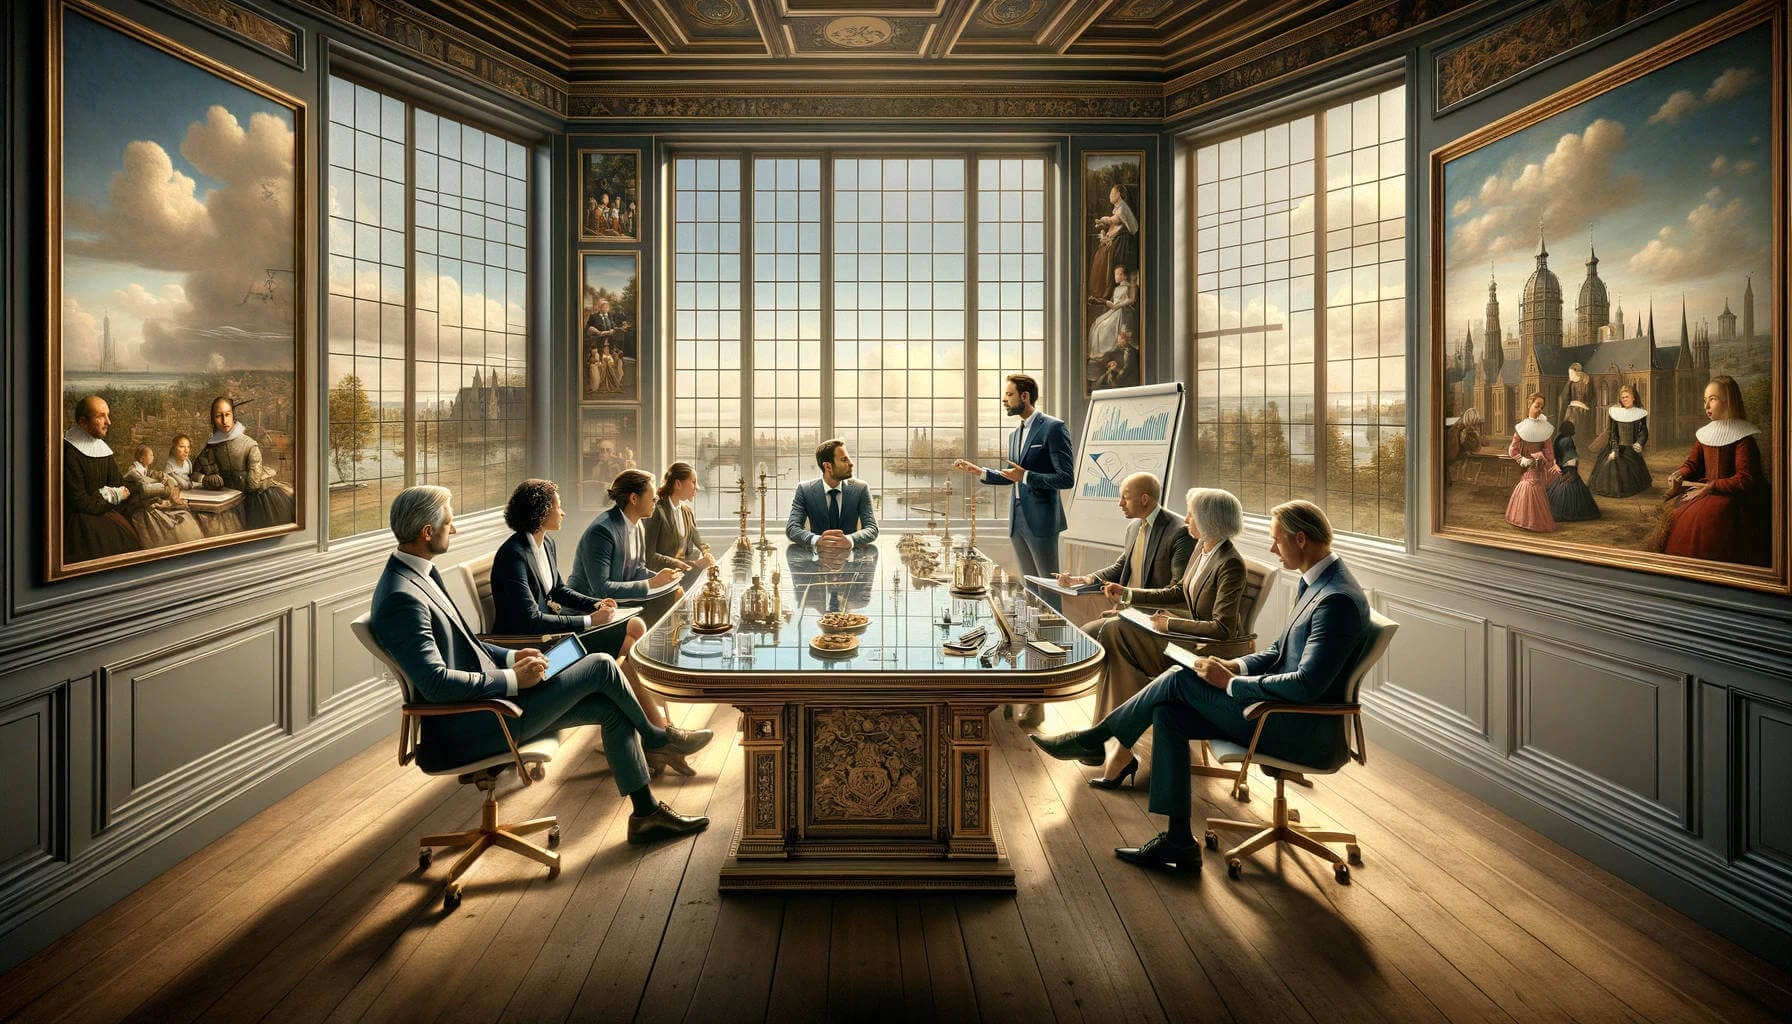 A landscape depiction of a modern leadership coaching session inspired by 16th-century Dutch art, highlighting executives in contemporary business attire amidst strategic planning tools.